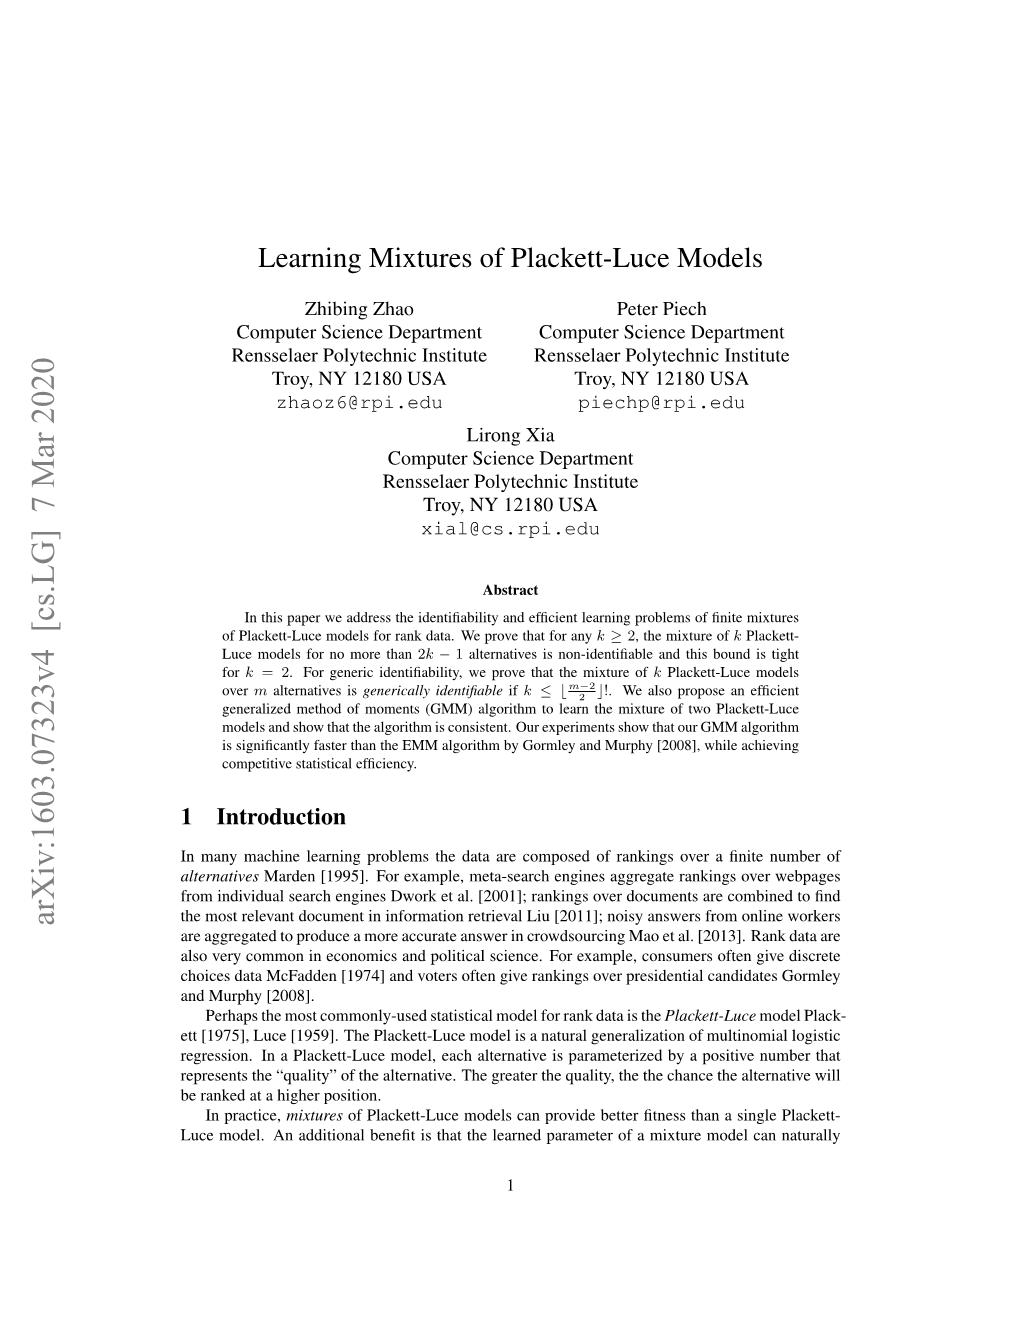 Learning Mixtures of Plackett-Luce Models